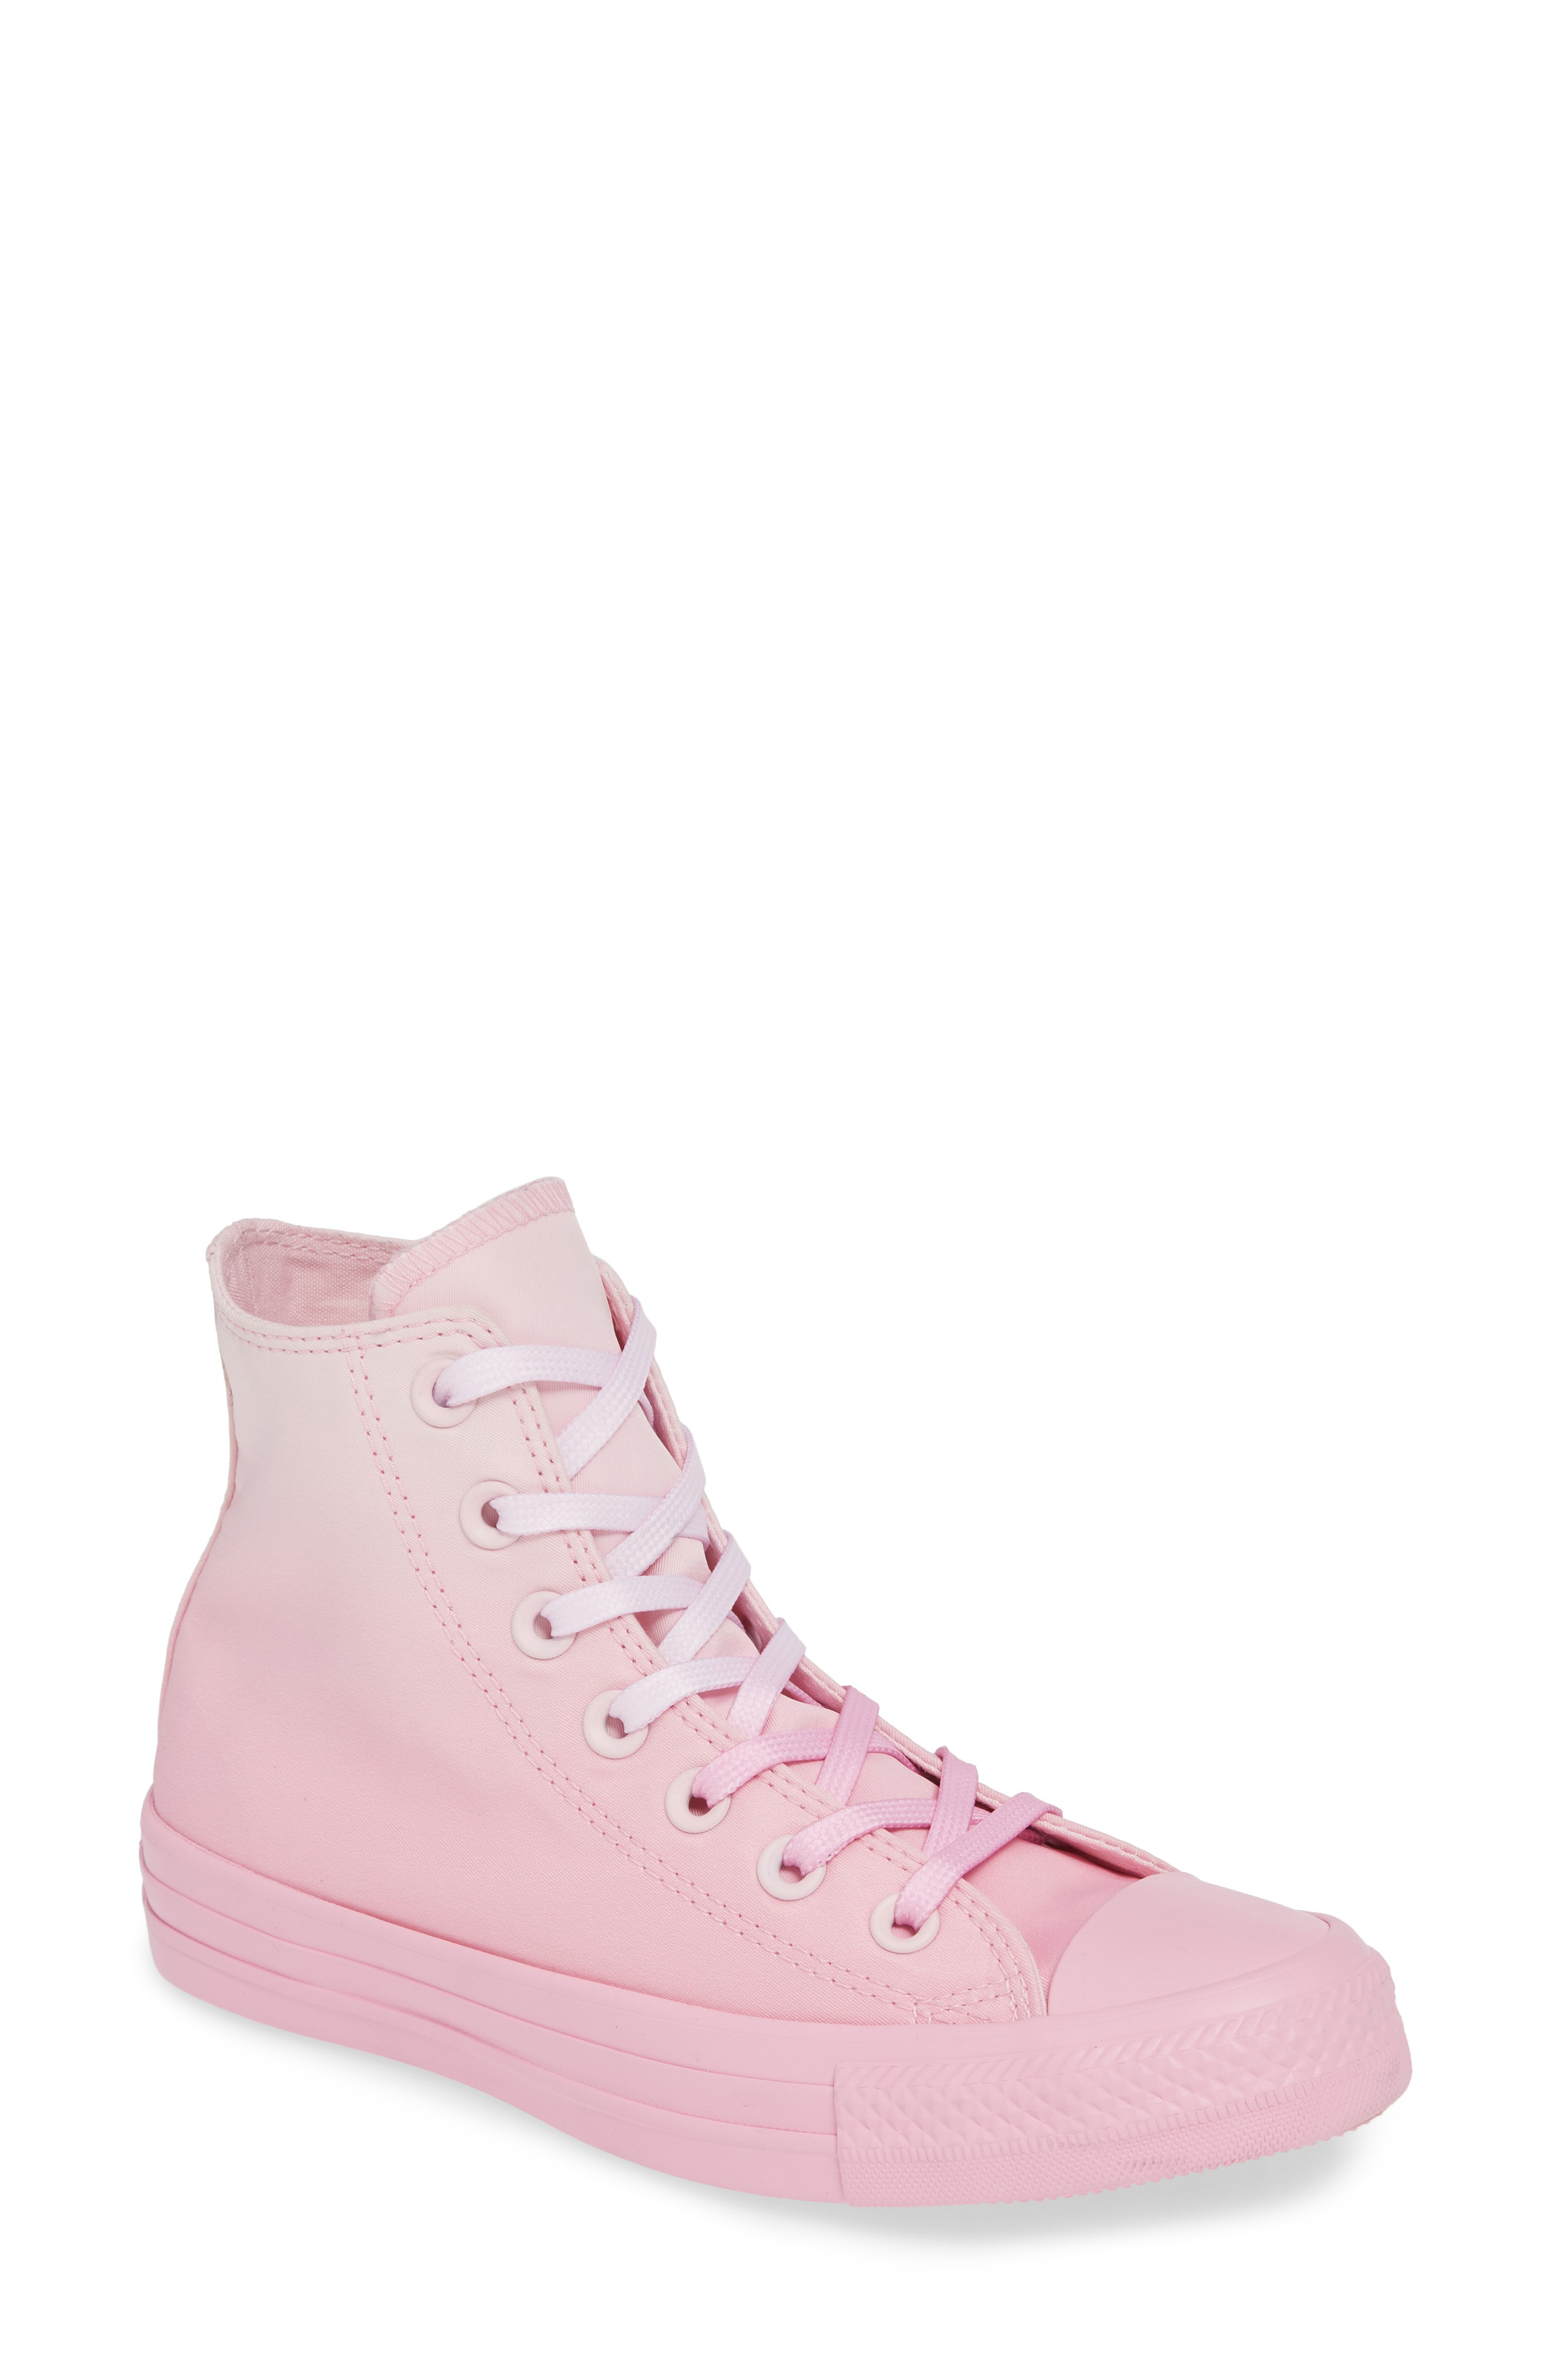 pink ombre converse